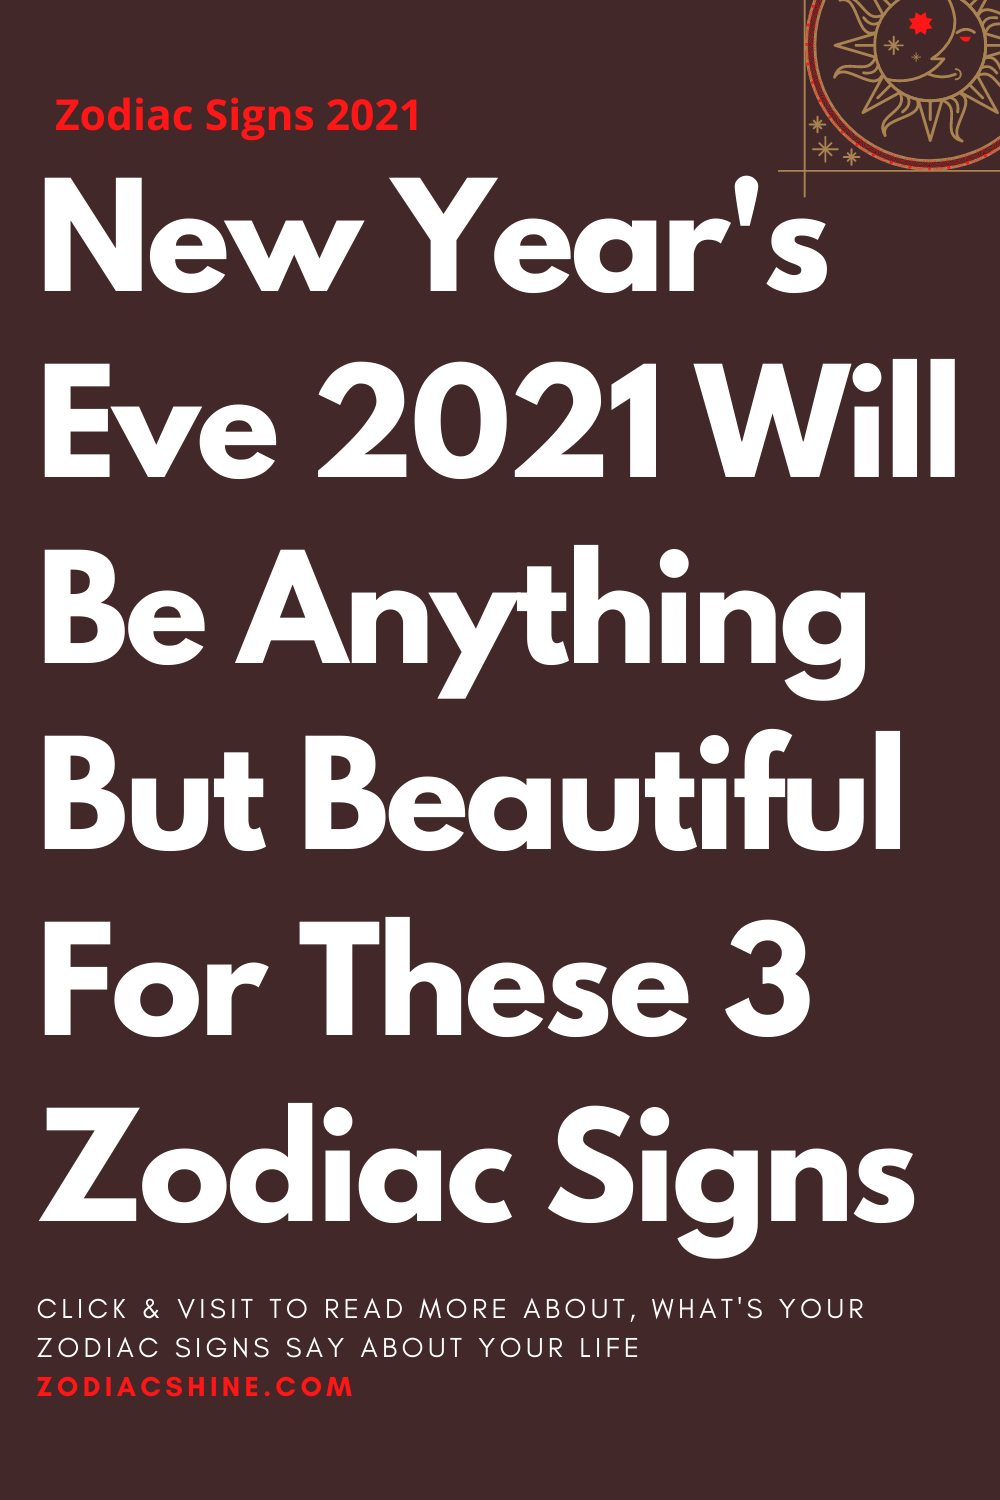 New Year's Eve 2021 Will Be Anything But Beautiful For These 3 Zodiac Signs